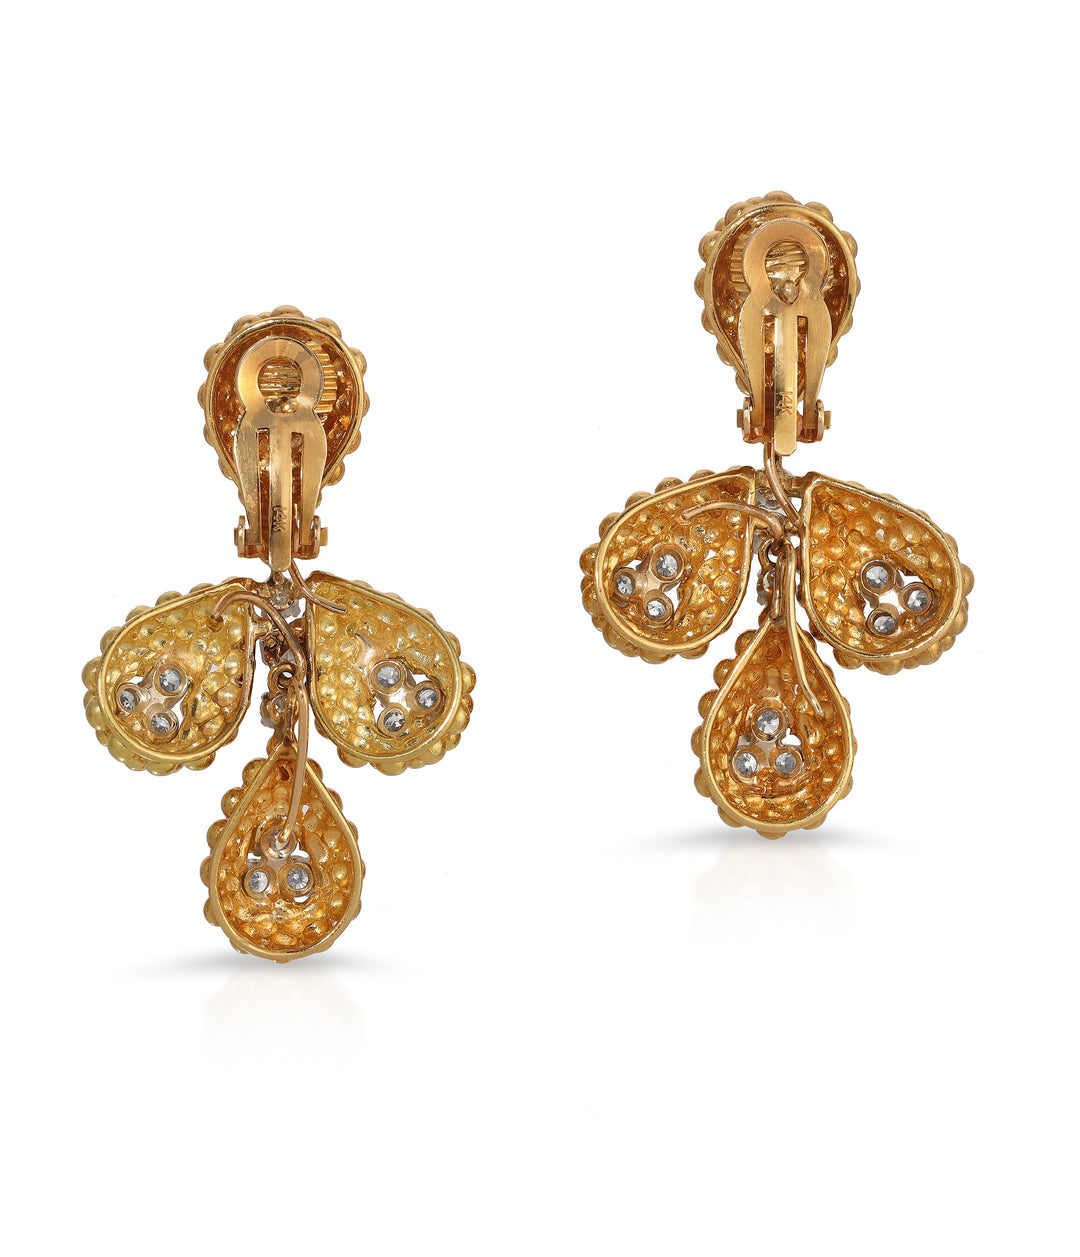 Interchangeable Diamond and Coral Earrings in 18K Gold